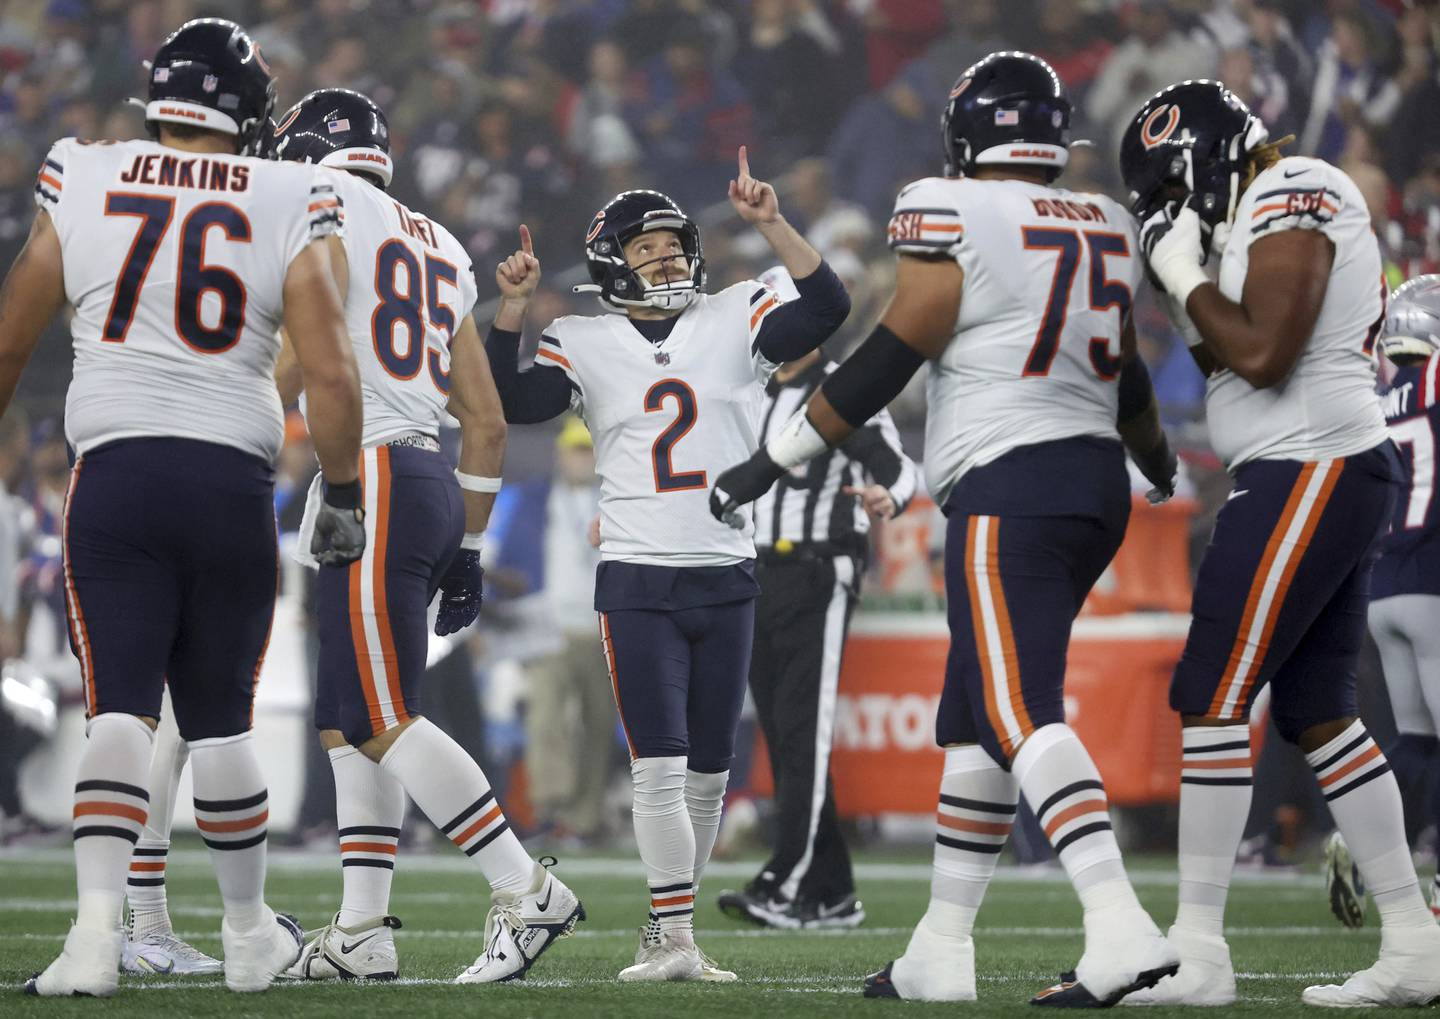 Bears kicker Cairo Santos celebrates after kicking a field goal in the first quarter against the Patriots at Gillette Stadium on Oct. 24, 2022.